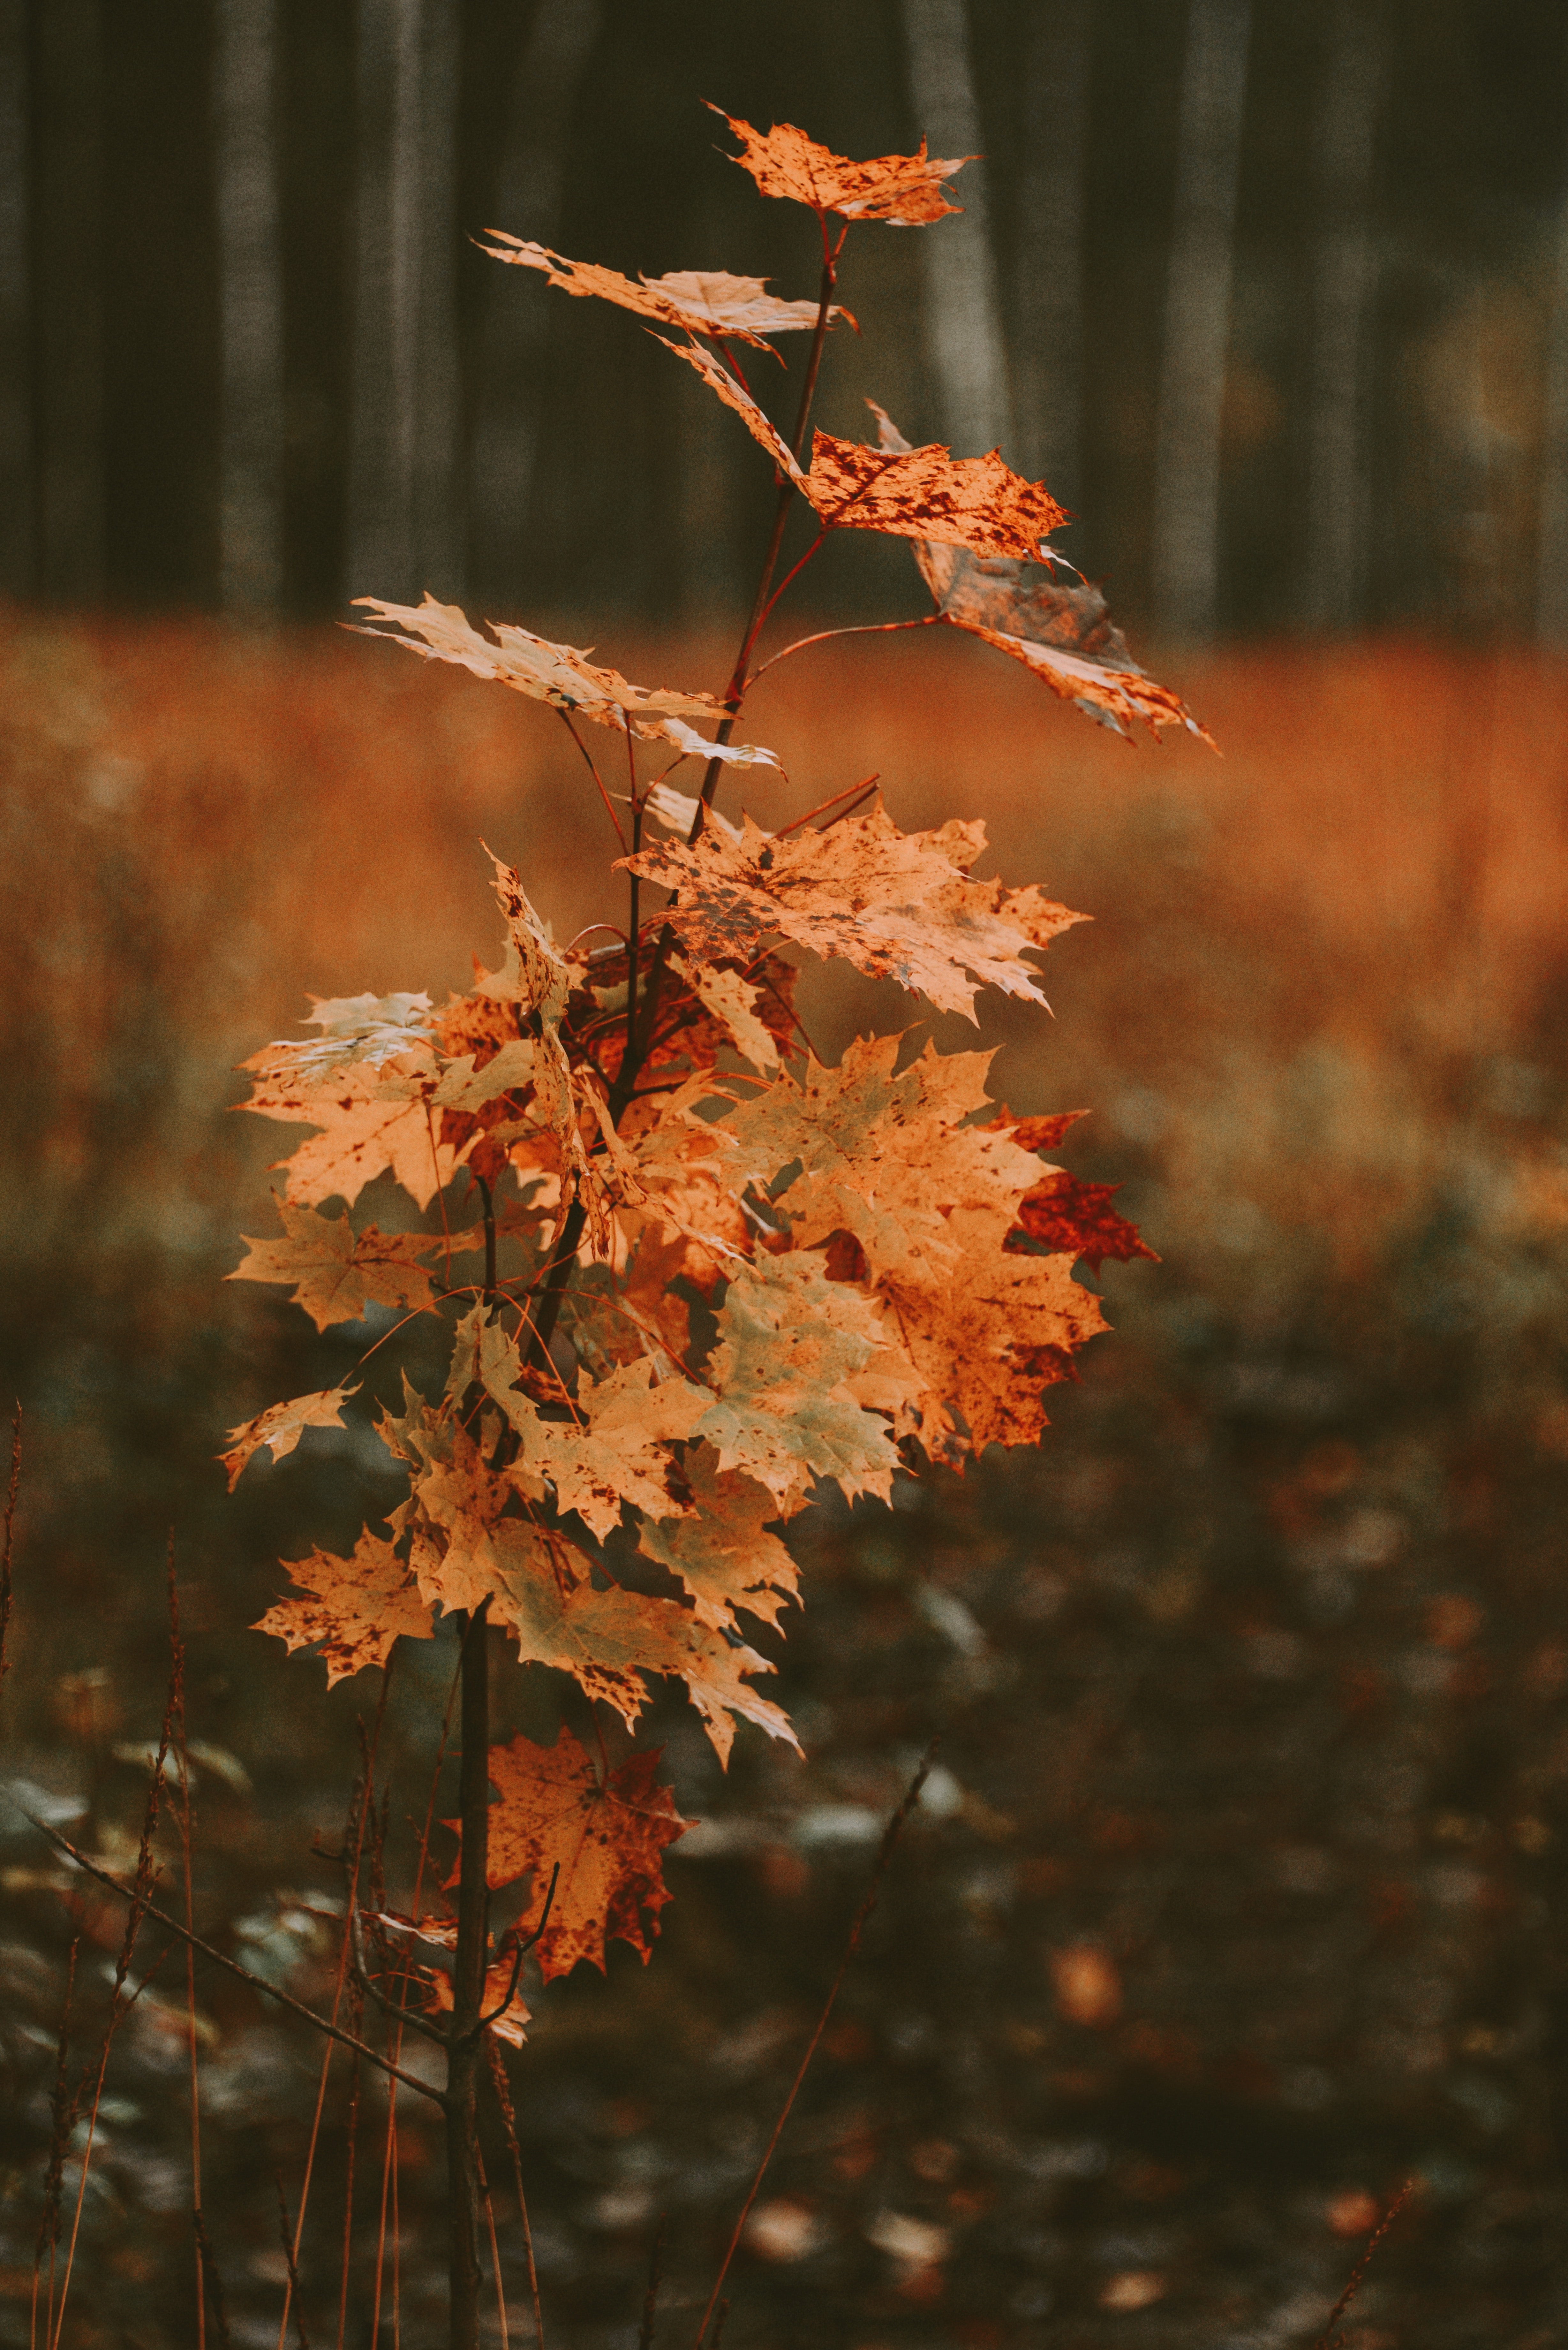 74465 download wallpaper leaves, tree, autumn, nature, wood, dry, maple screensavers and pictures for free